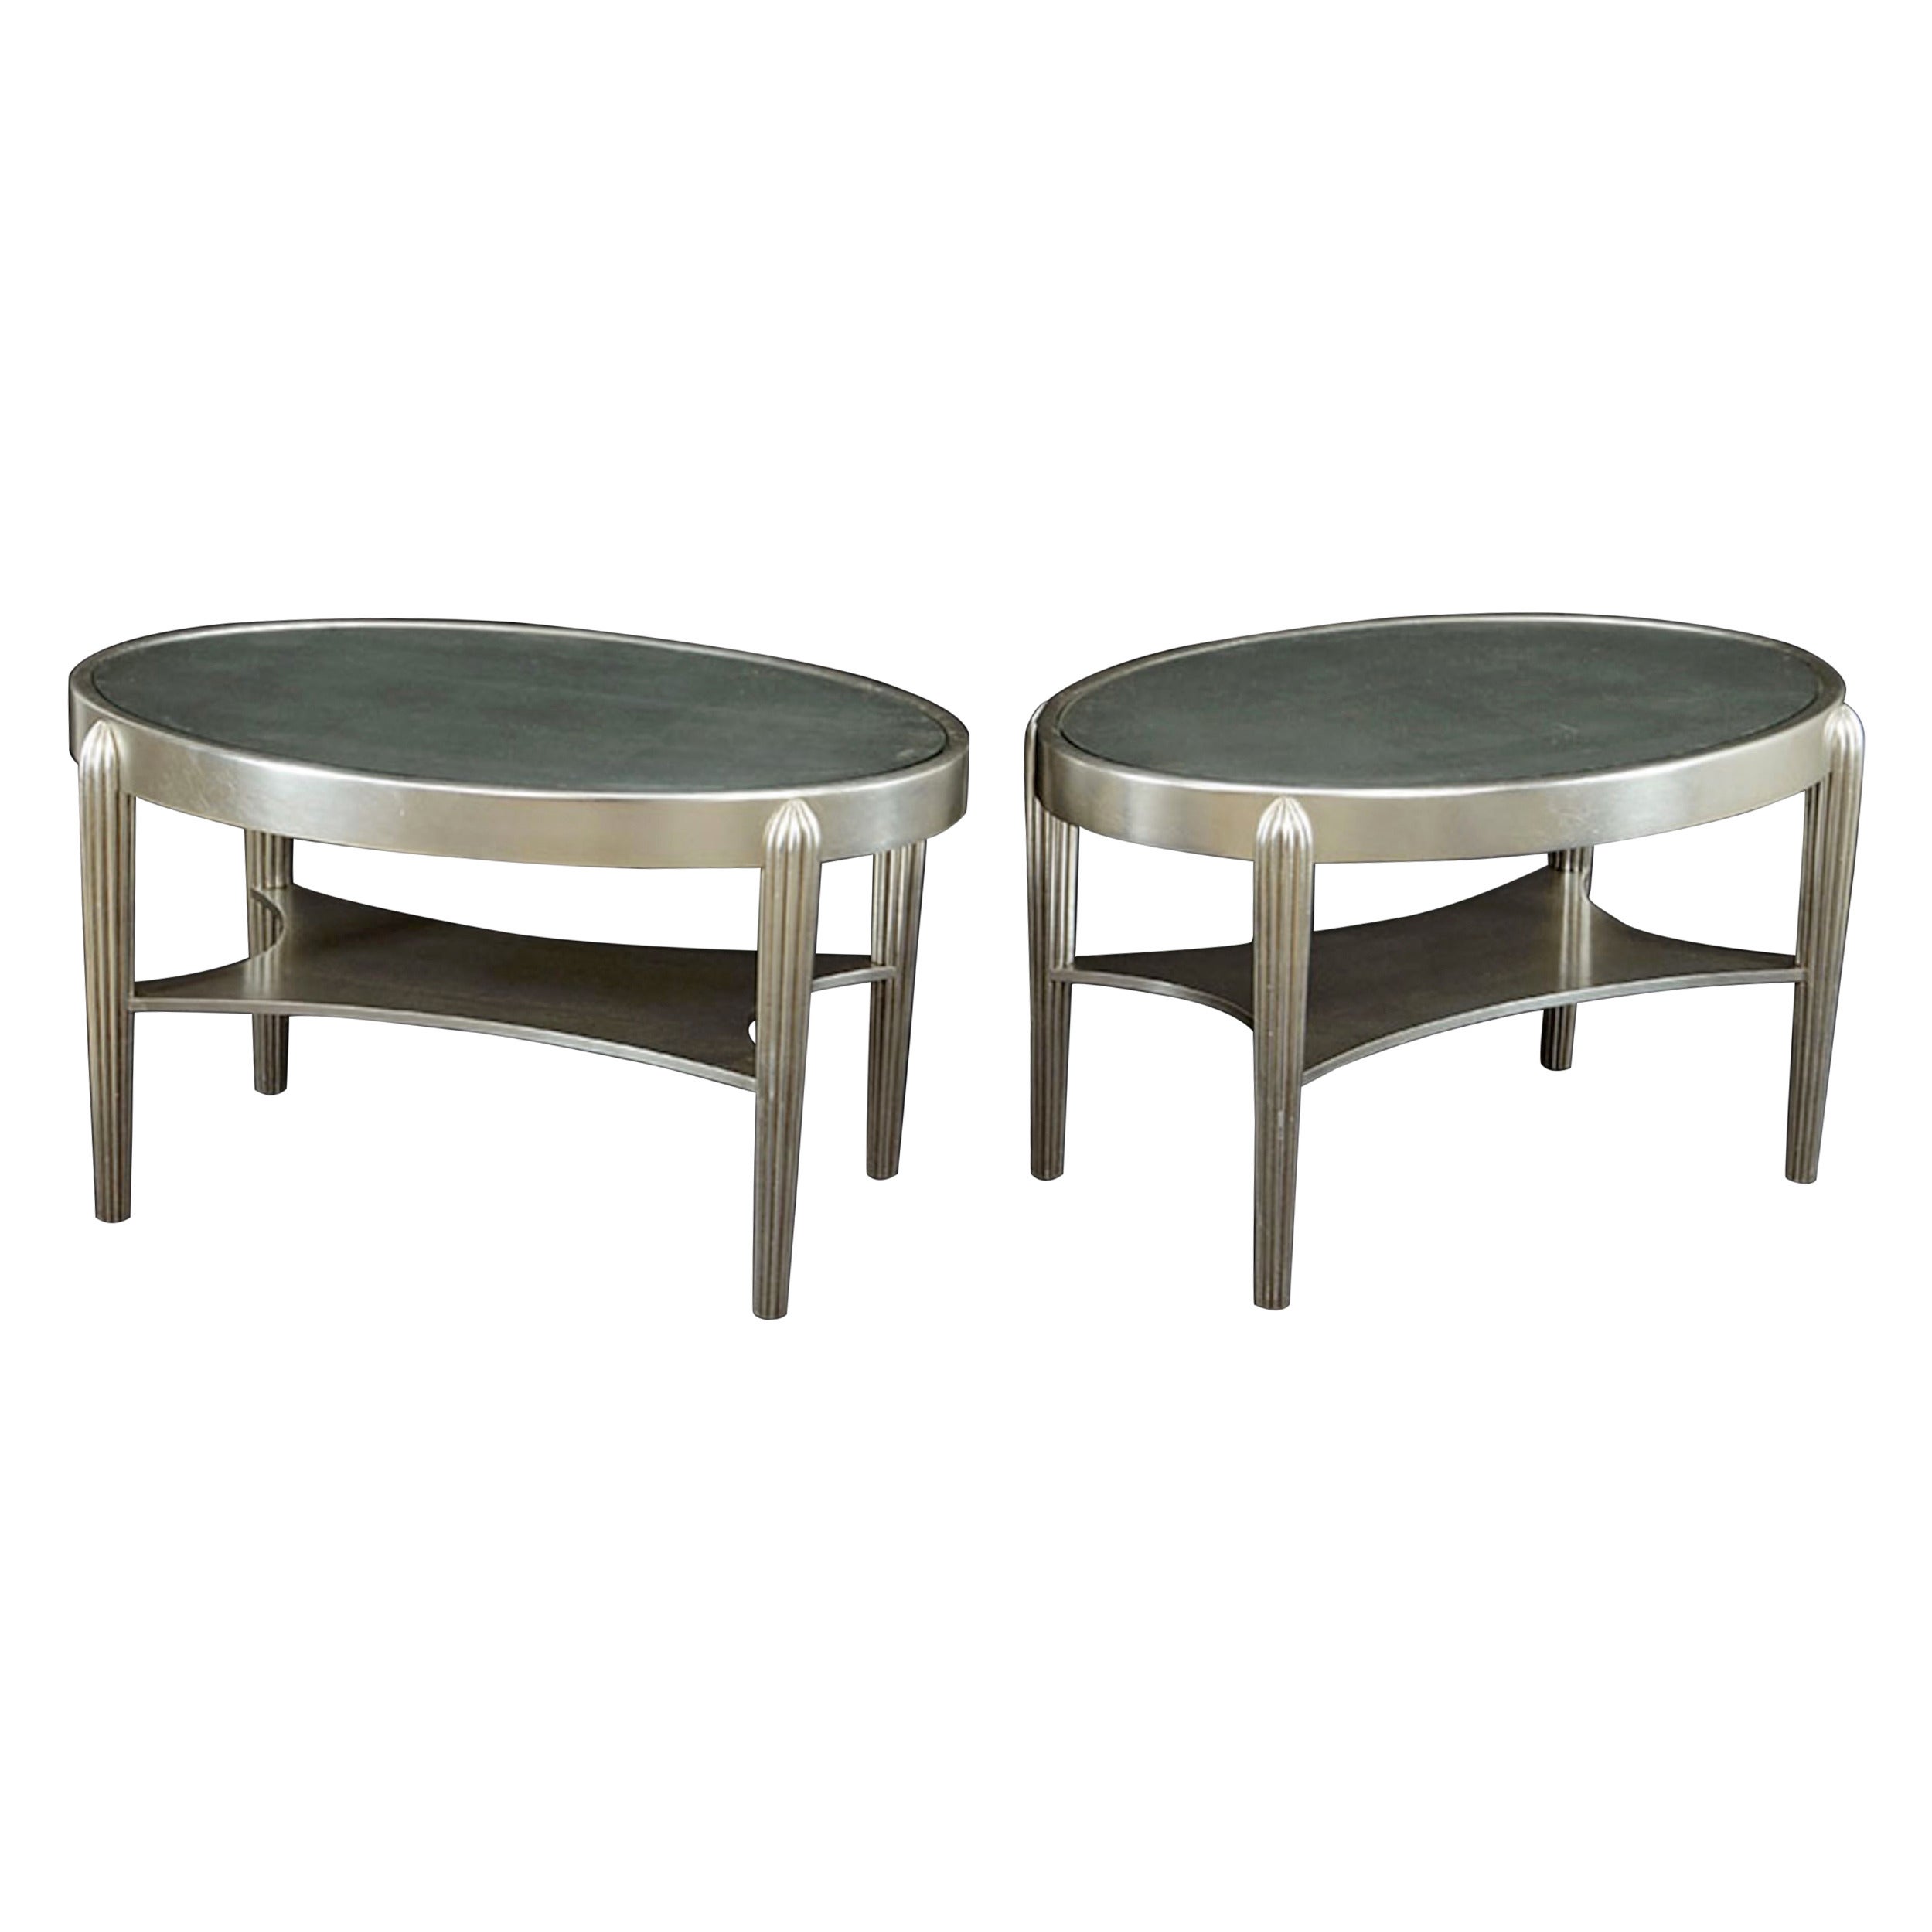 Two Art Deco Style Silver Leaf Side Tables.  Great scale and form, pristine.